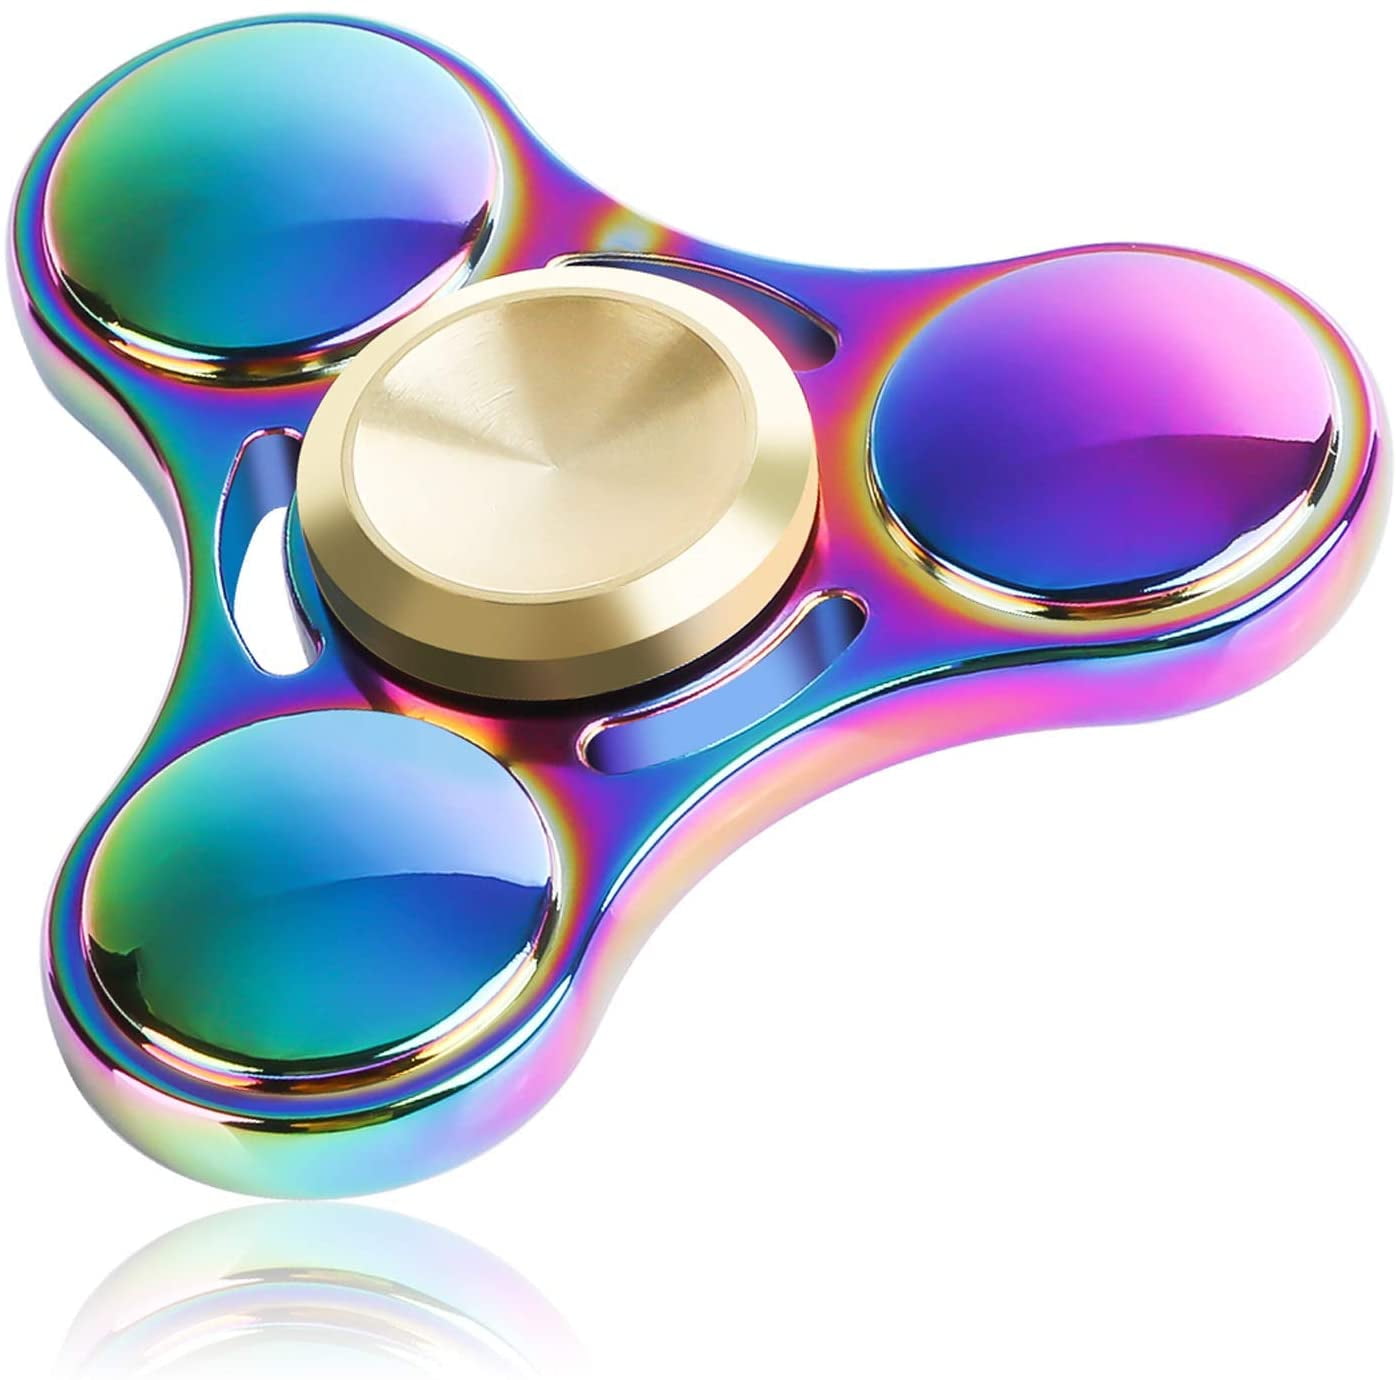 Fidget Spinner Metal Hand Spinner Stress Relief Toys For Kids Tri Focus Adhd EDC 